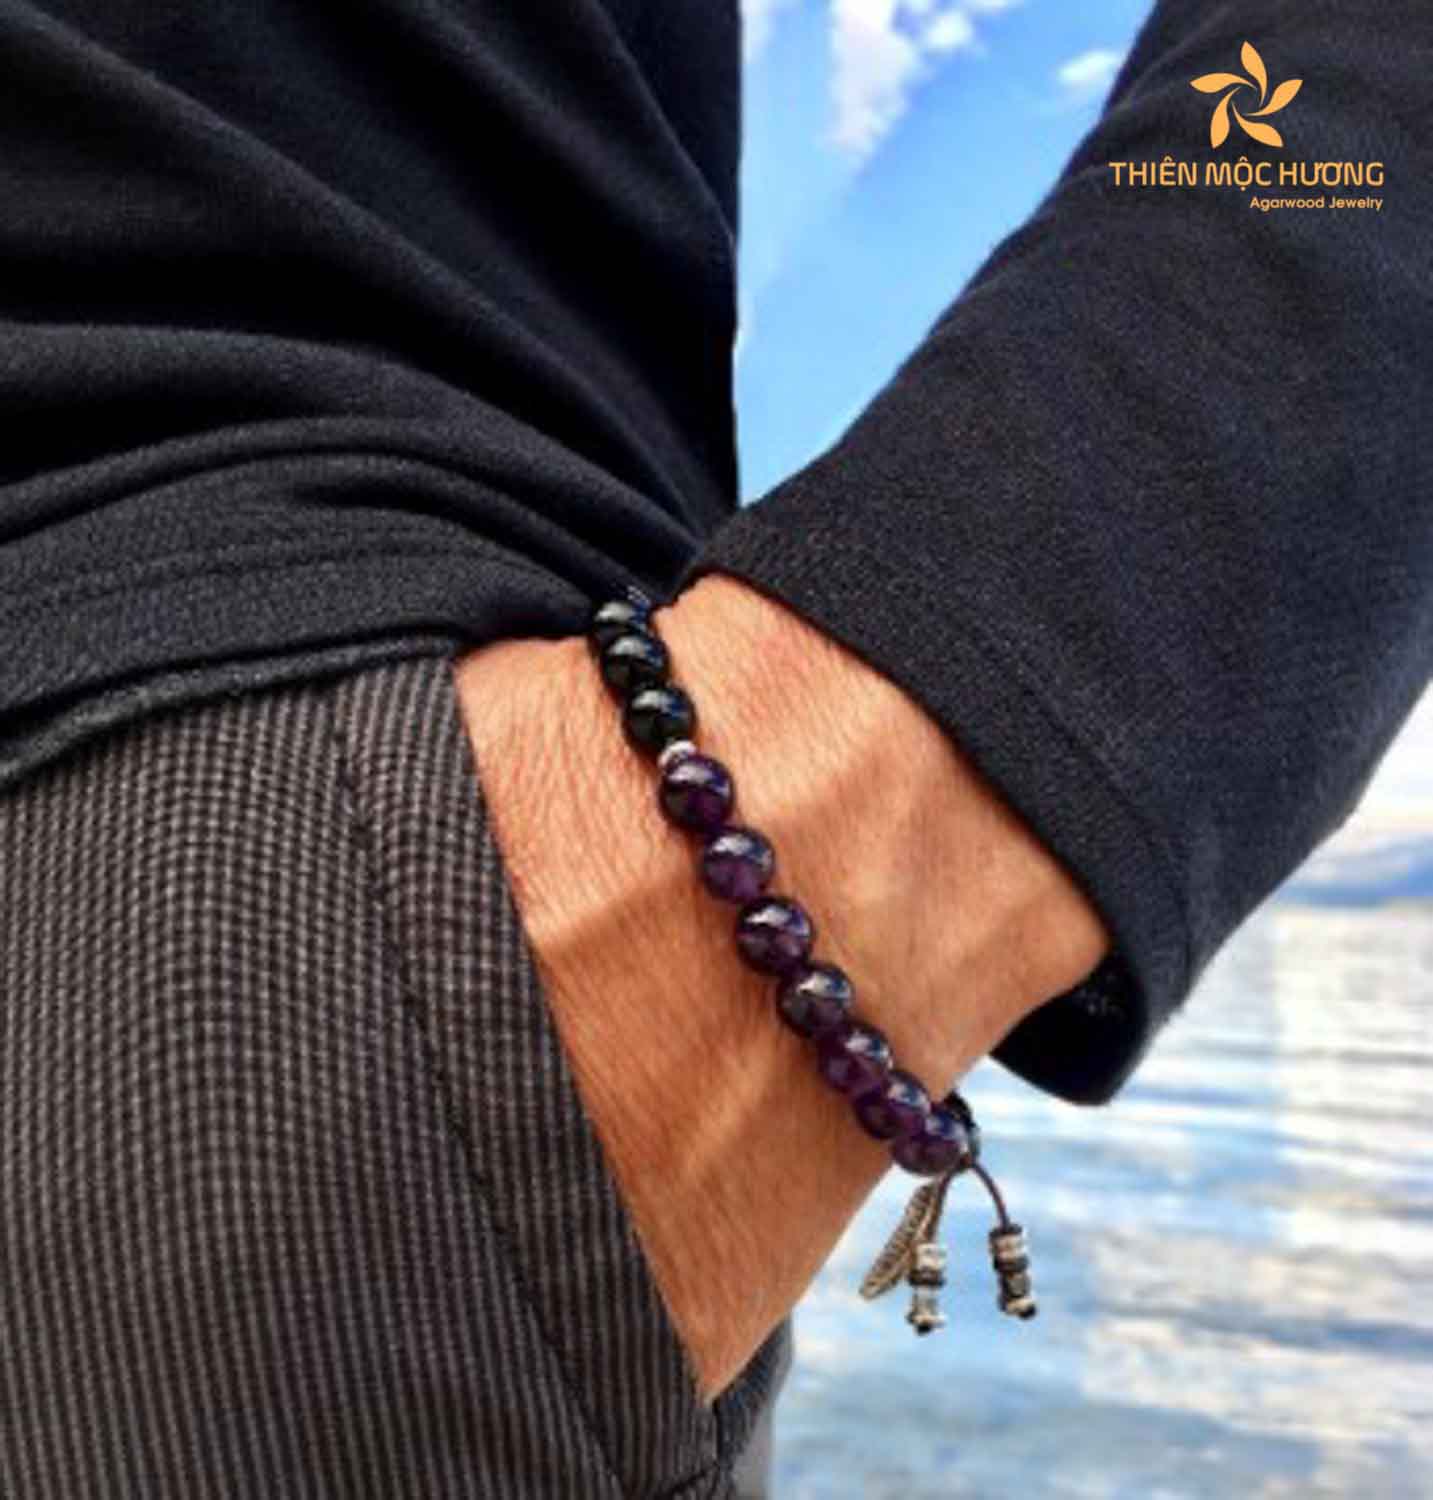 Amethyst bracelet is now becoming more and more common for men to sport bracelets